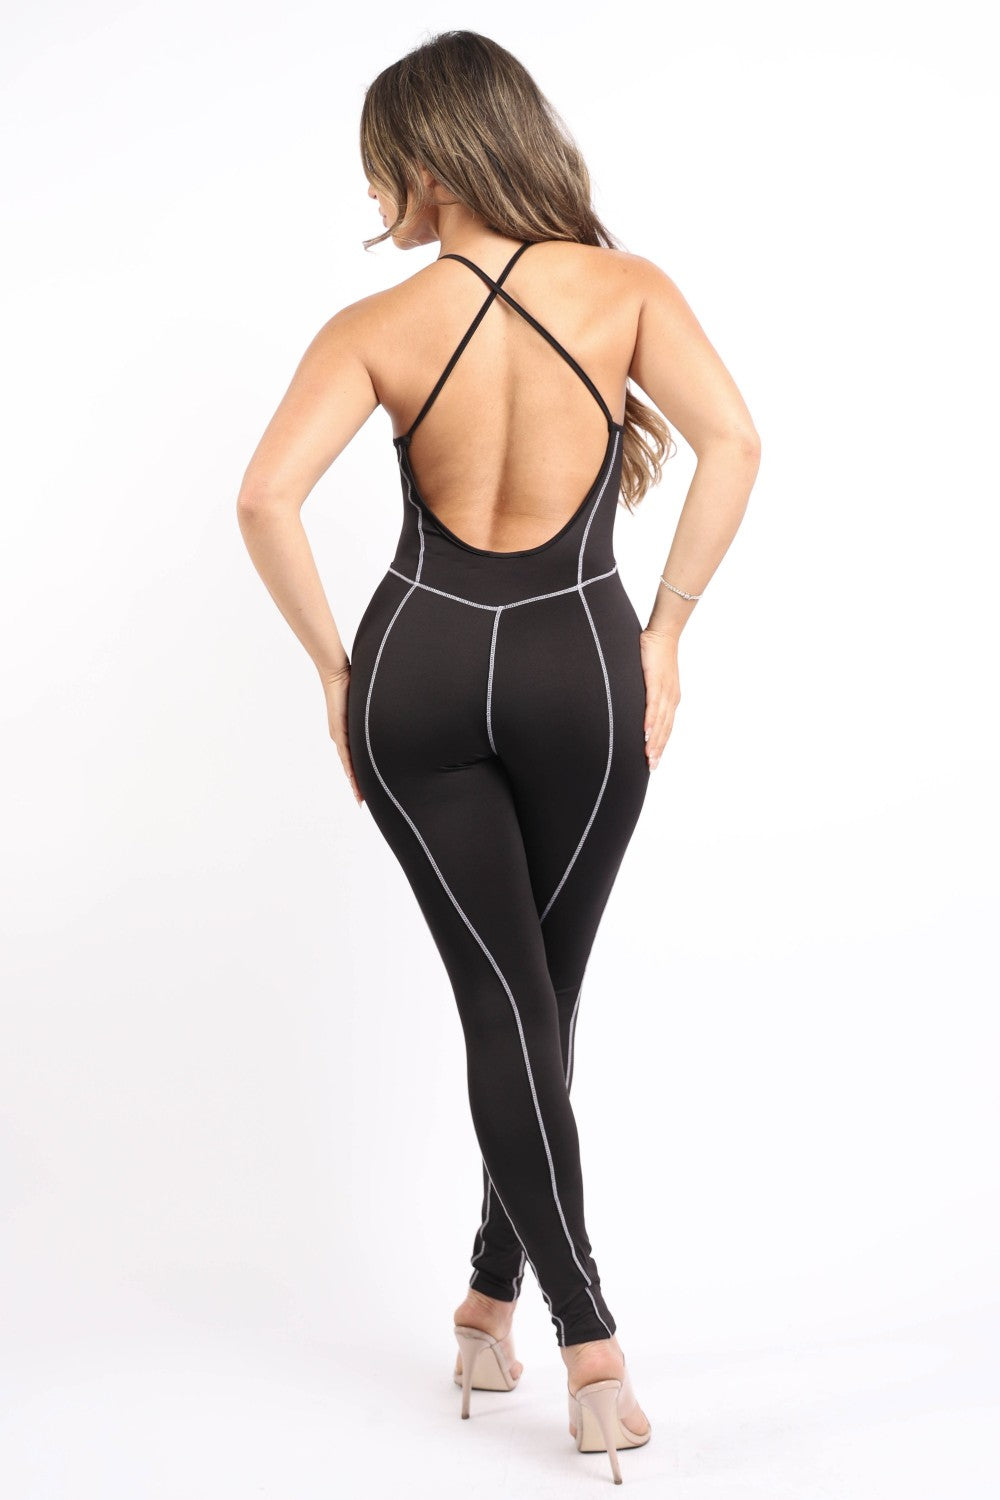 Women's black overlock jumpsuit with white lines, spaghetti straps and an open criss cross back design. rear view